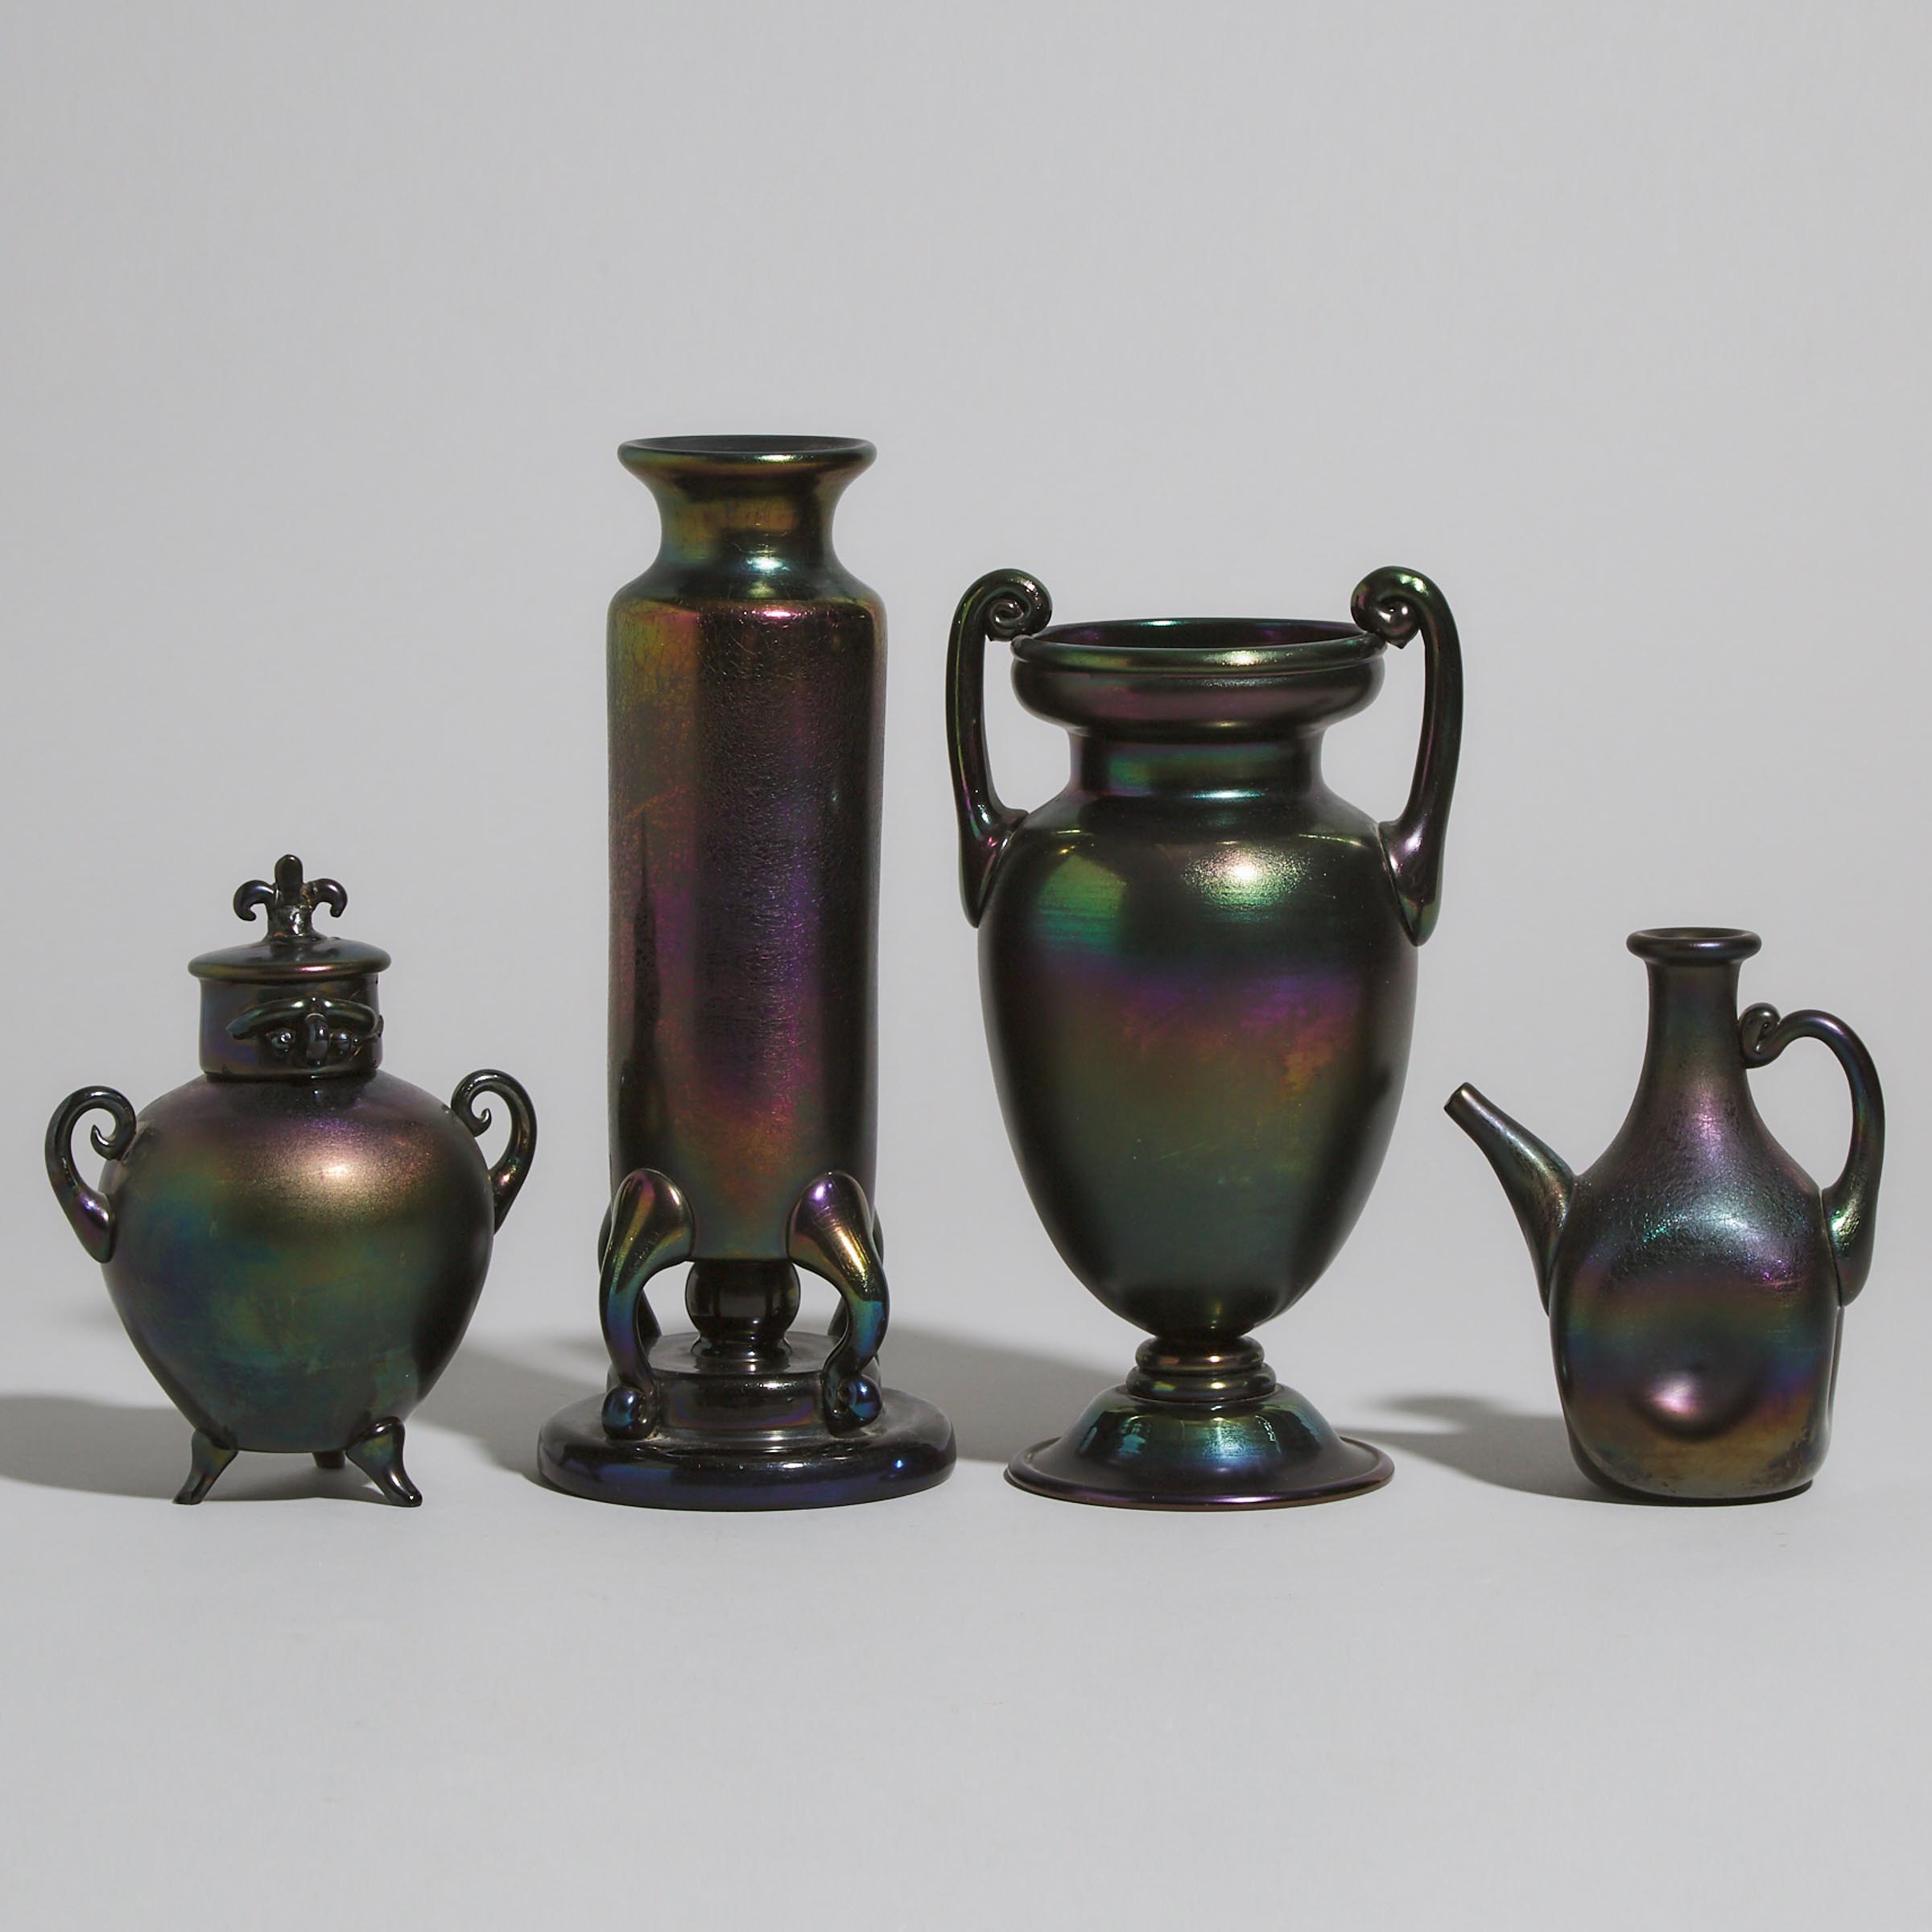 Two Iridescent Amethyst Glass Vases, Covered Vase, and a Jug, 20th century